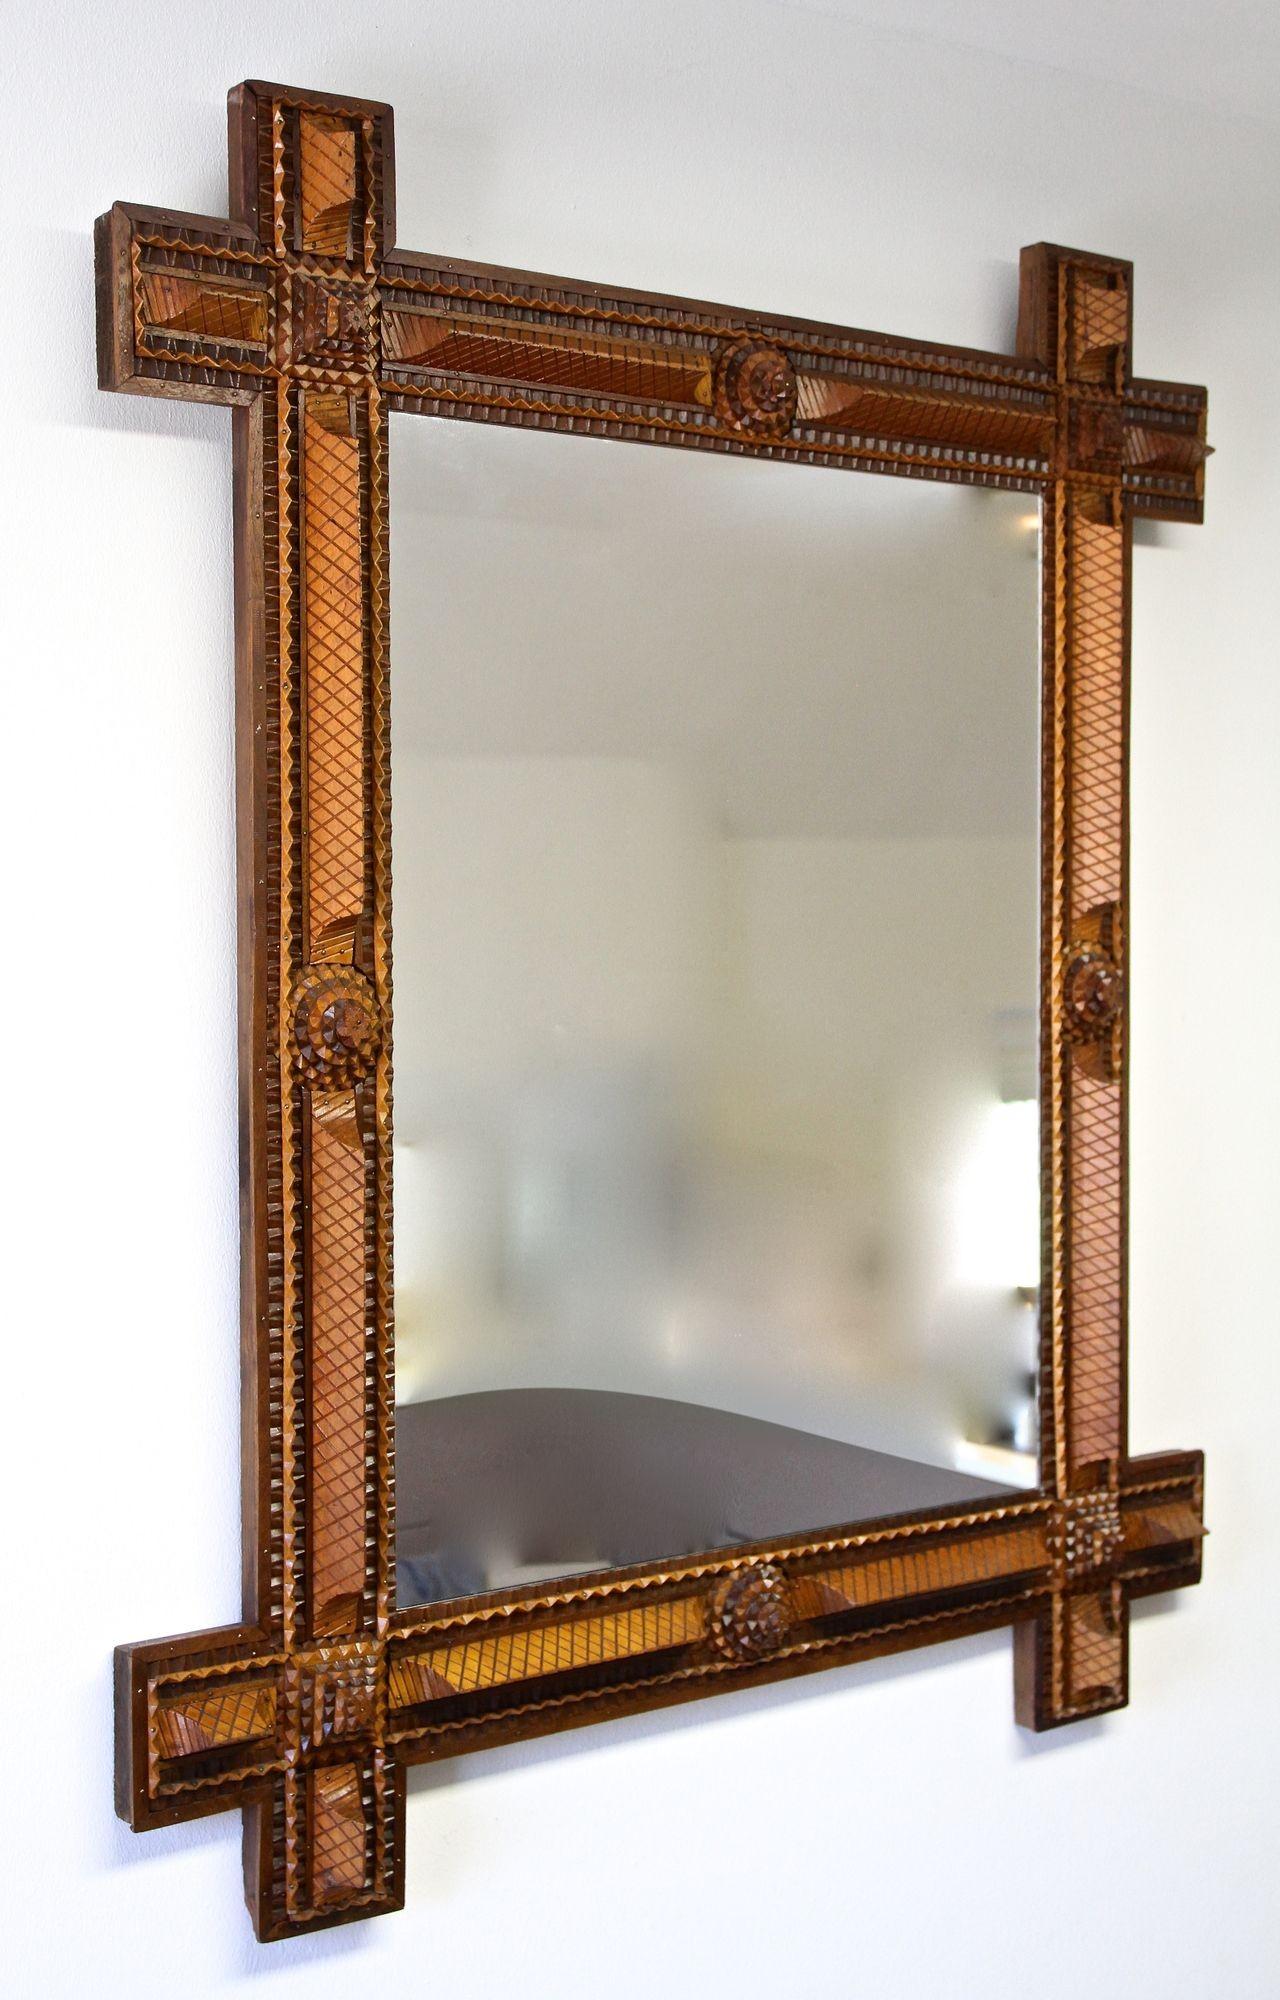 Very special crafted, extraordinary looking Tramp Art wall mirror from the late 19th century in Austria. This large, elaborately made rustic mirror from around 1890 impresses with its outstanding variety of different elements: chip carved square